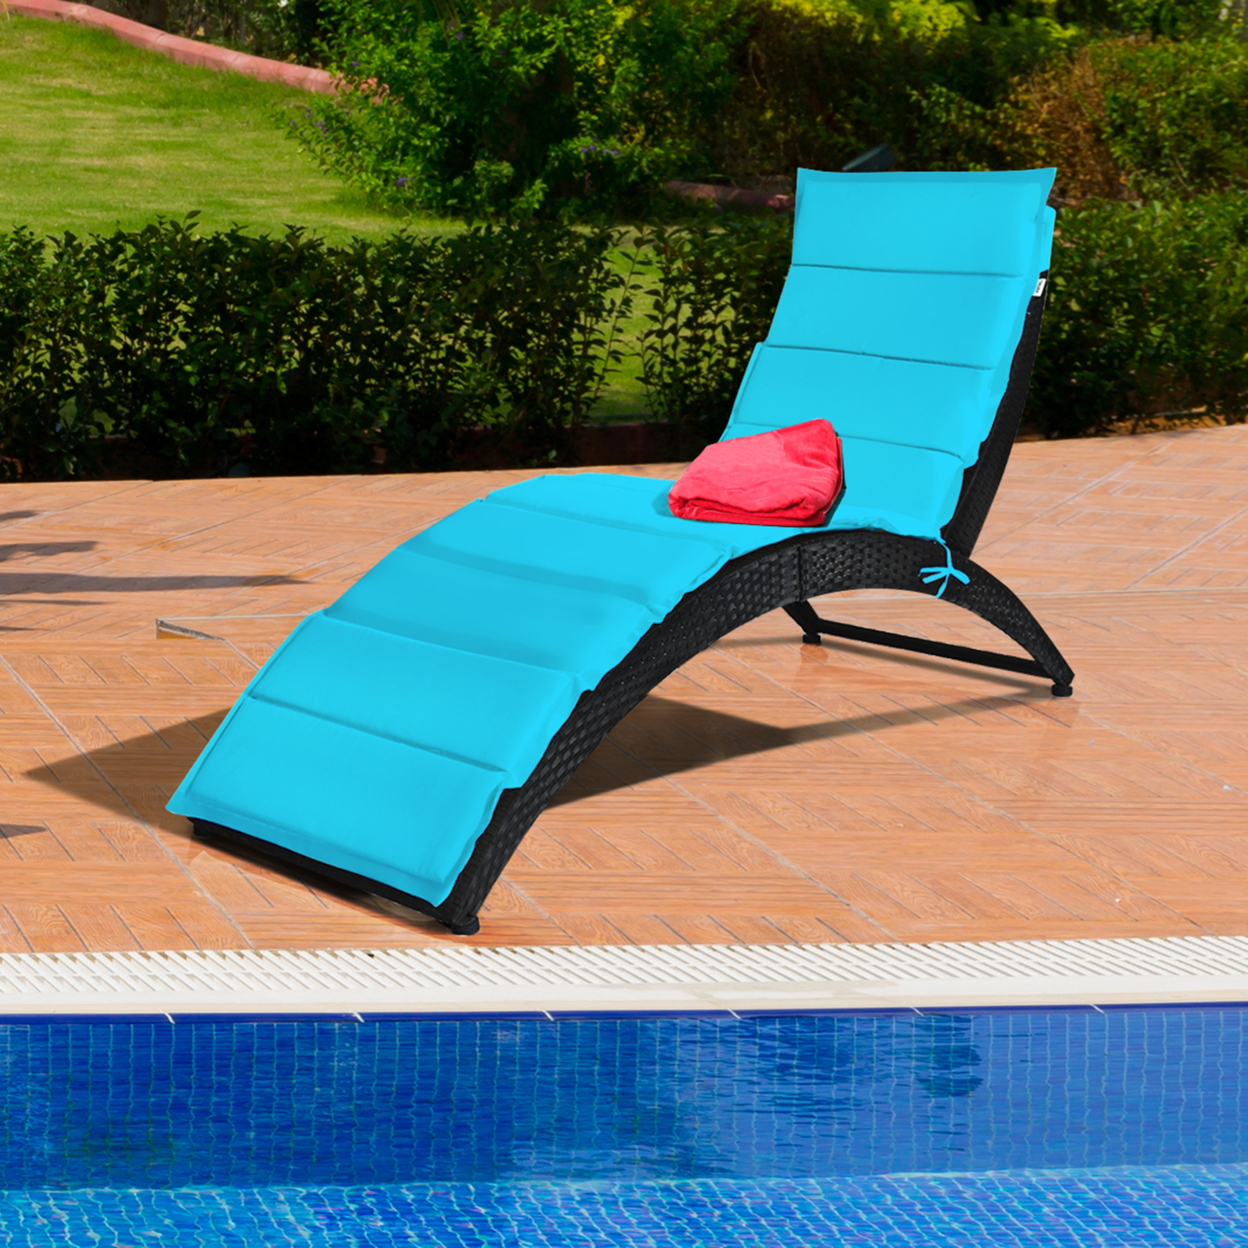 Foldable Rattan Wicker Chaise Lounge Chair W/ Turquoise Cushion Patio Outdoor